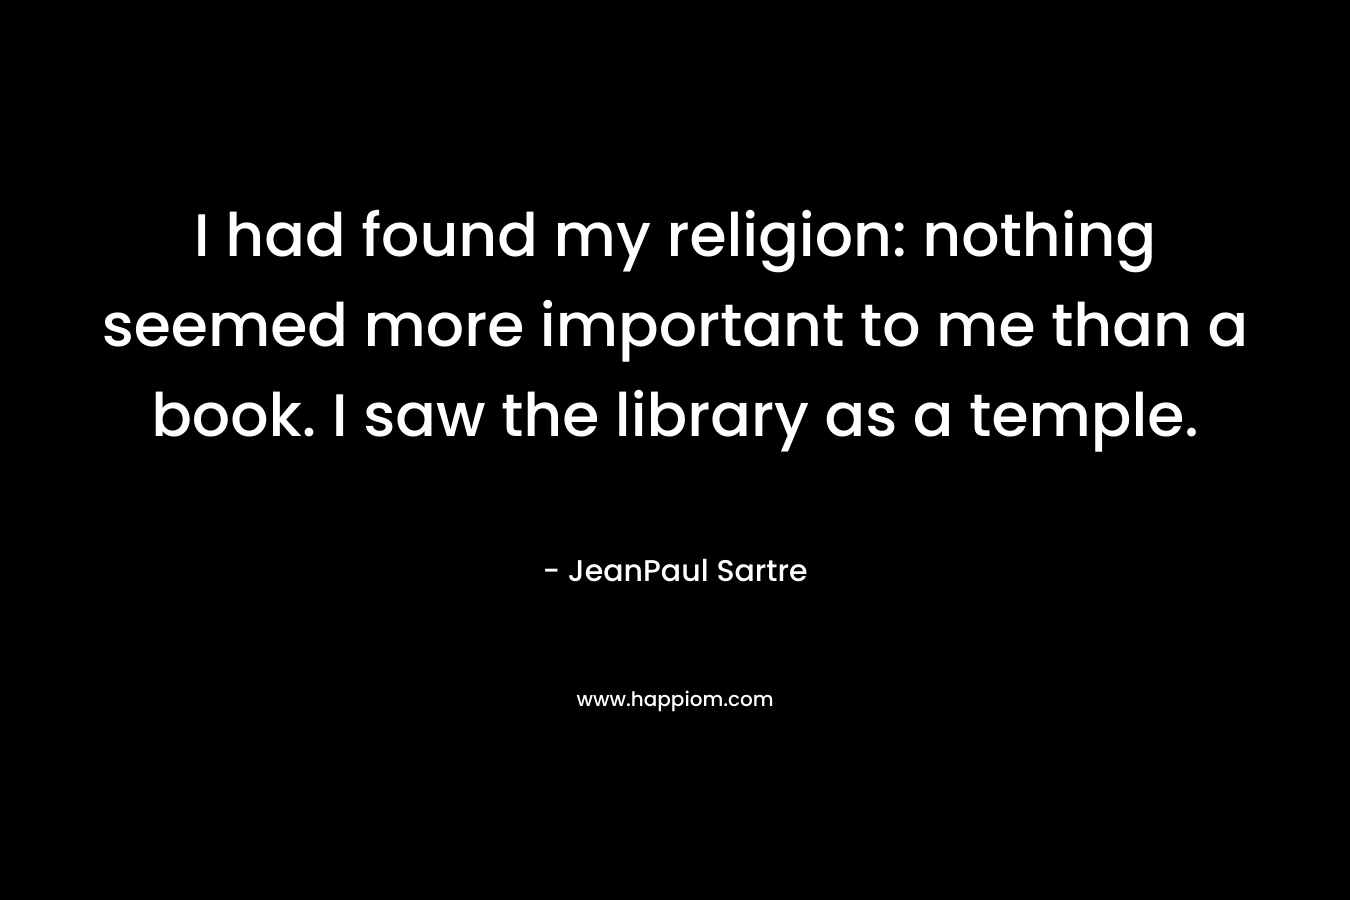 I had found my religion: nothing seemed more important to me than a book. I saw the library as a temple.